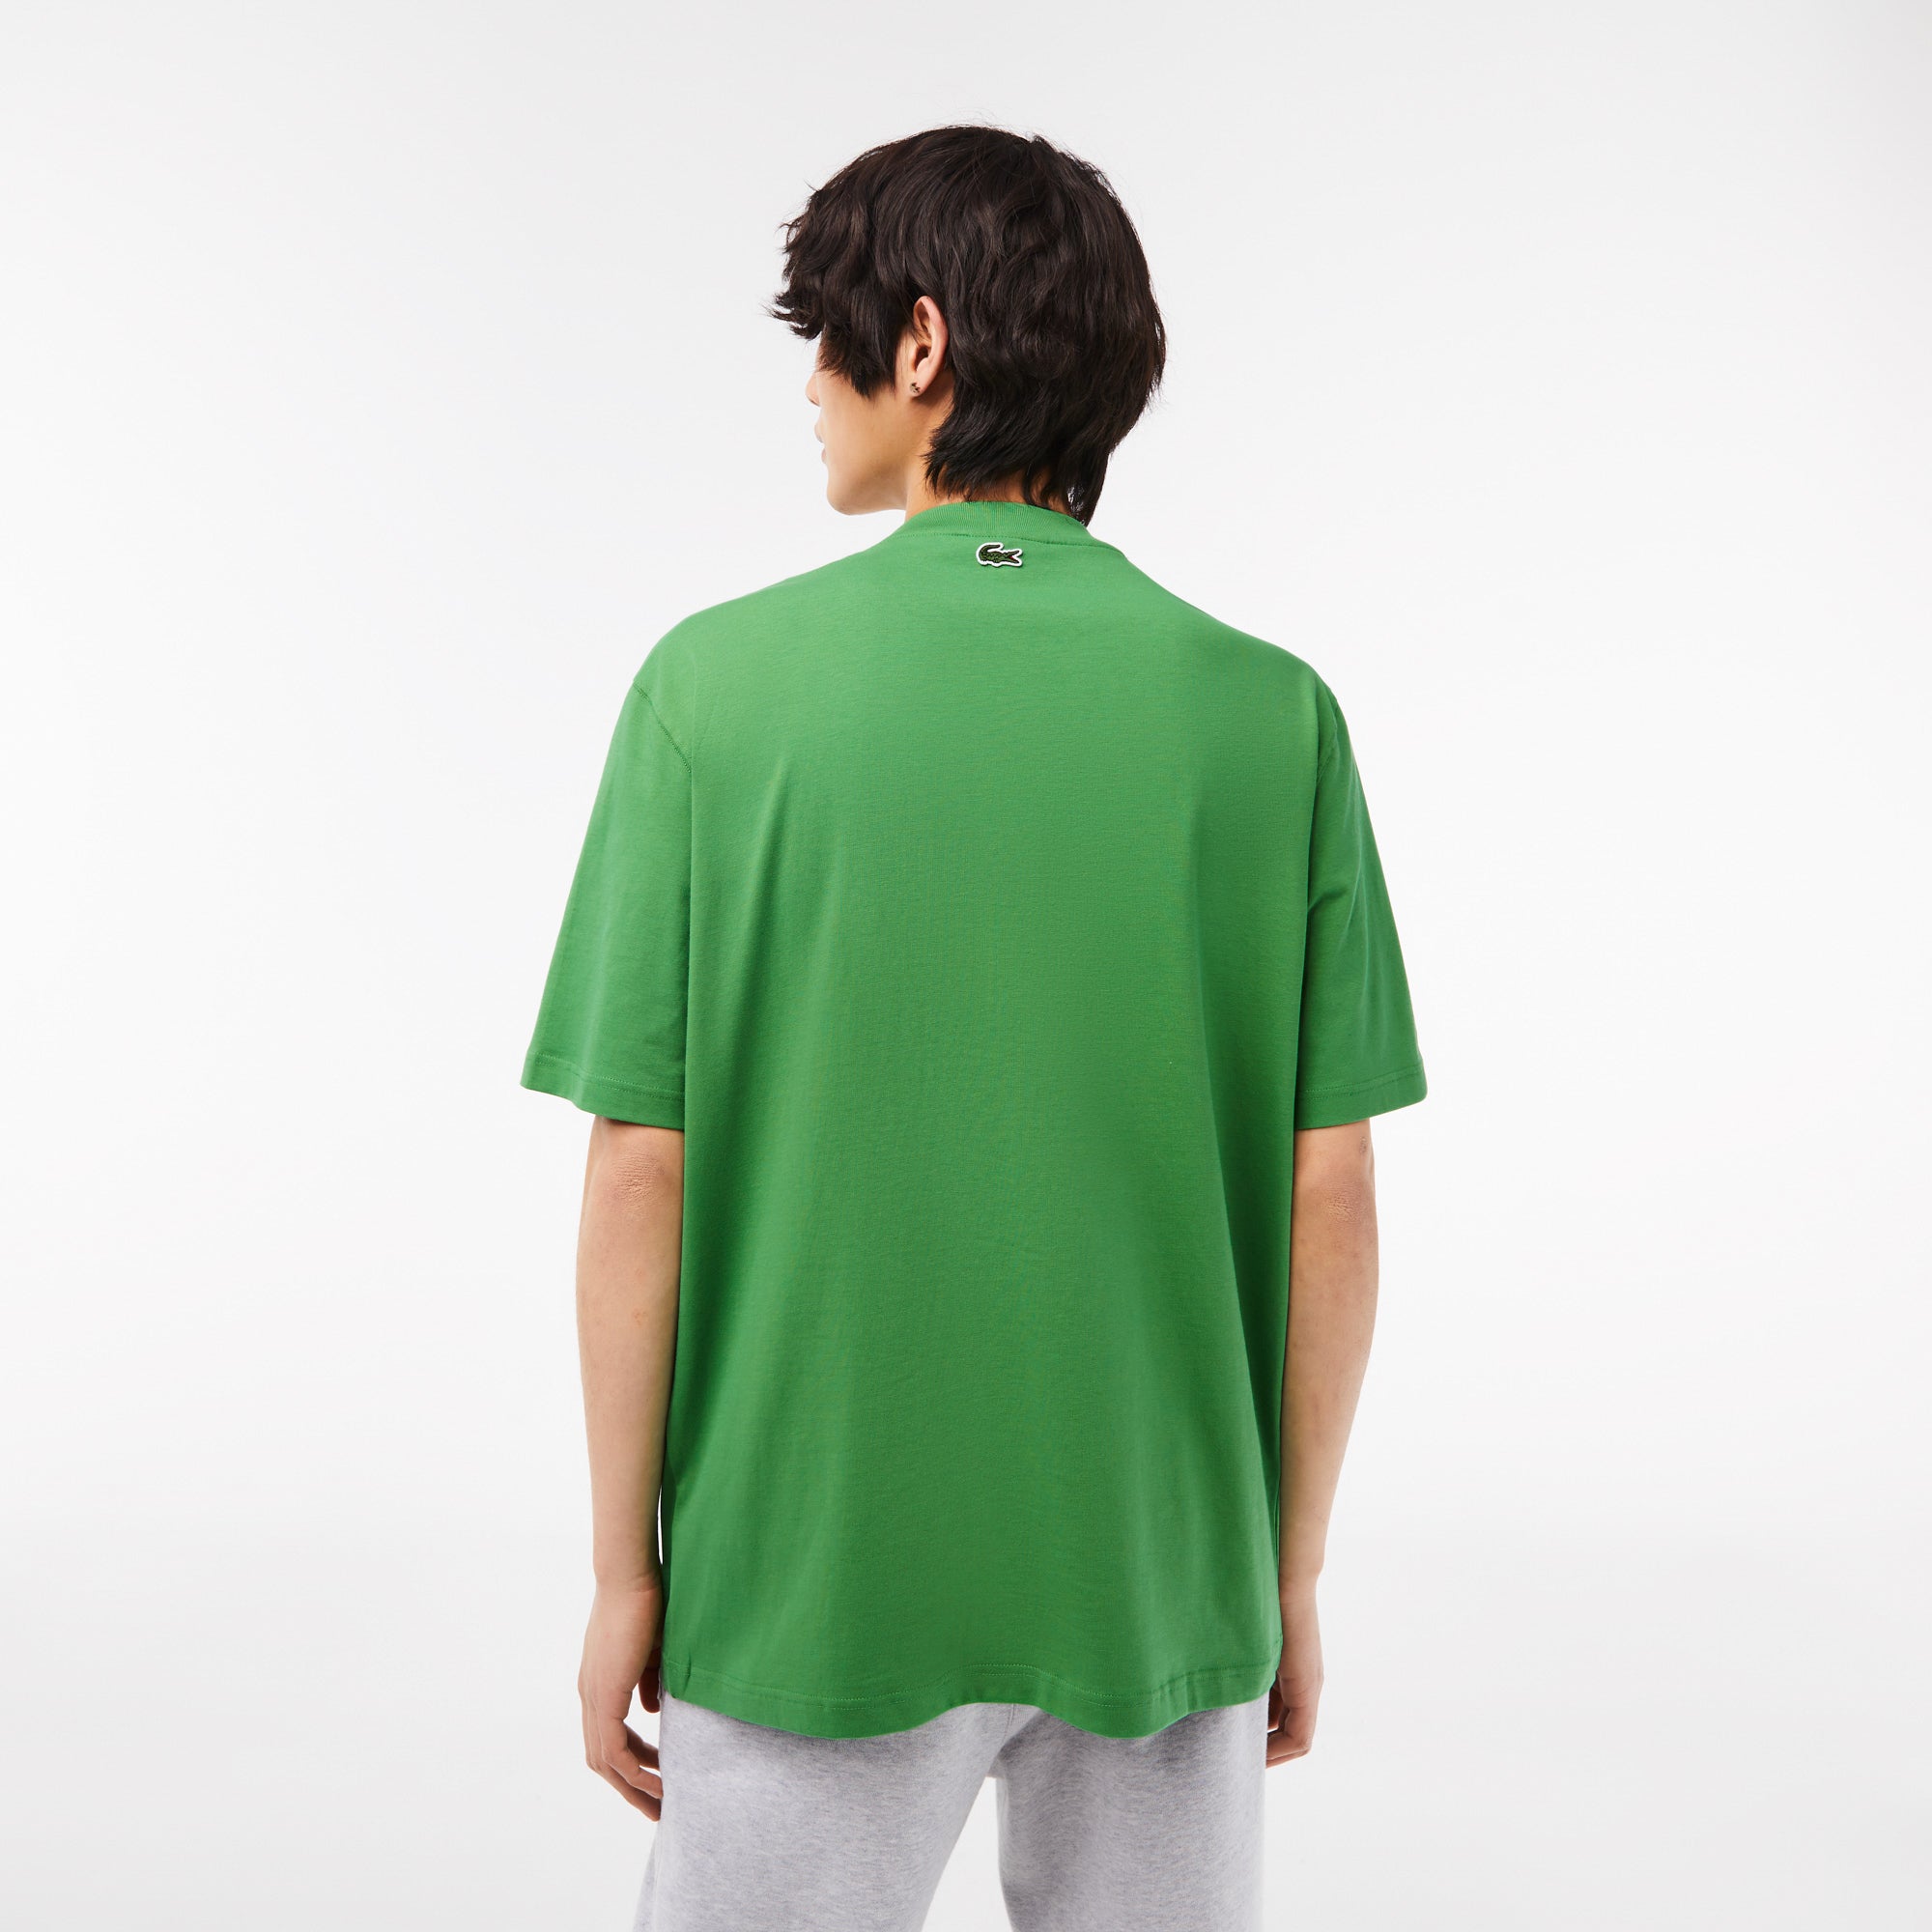 Lacoste Oversized Croc Polo Shirt in Green for Men